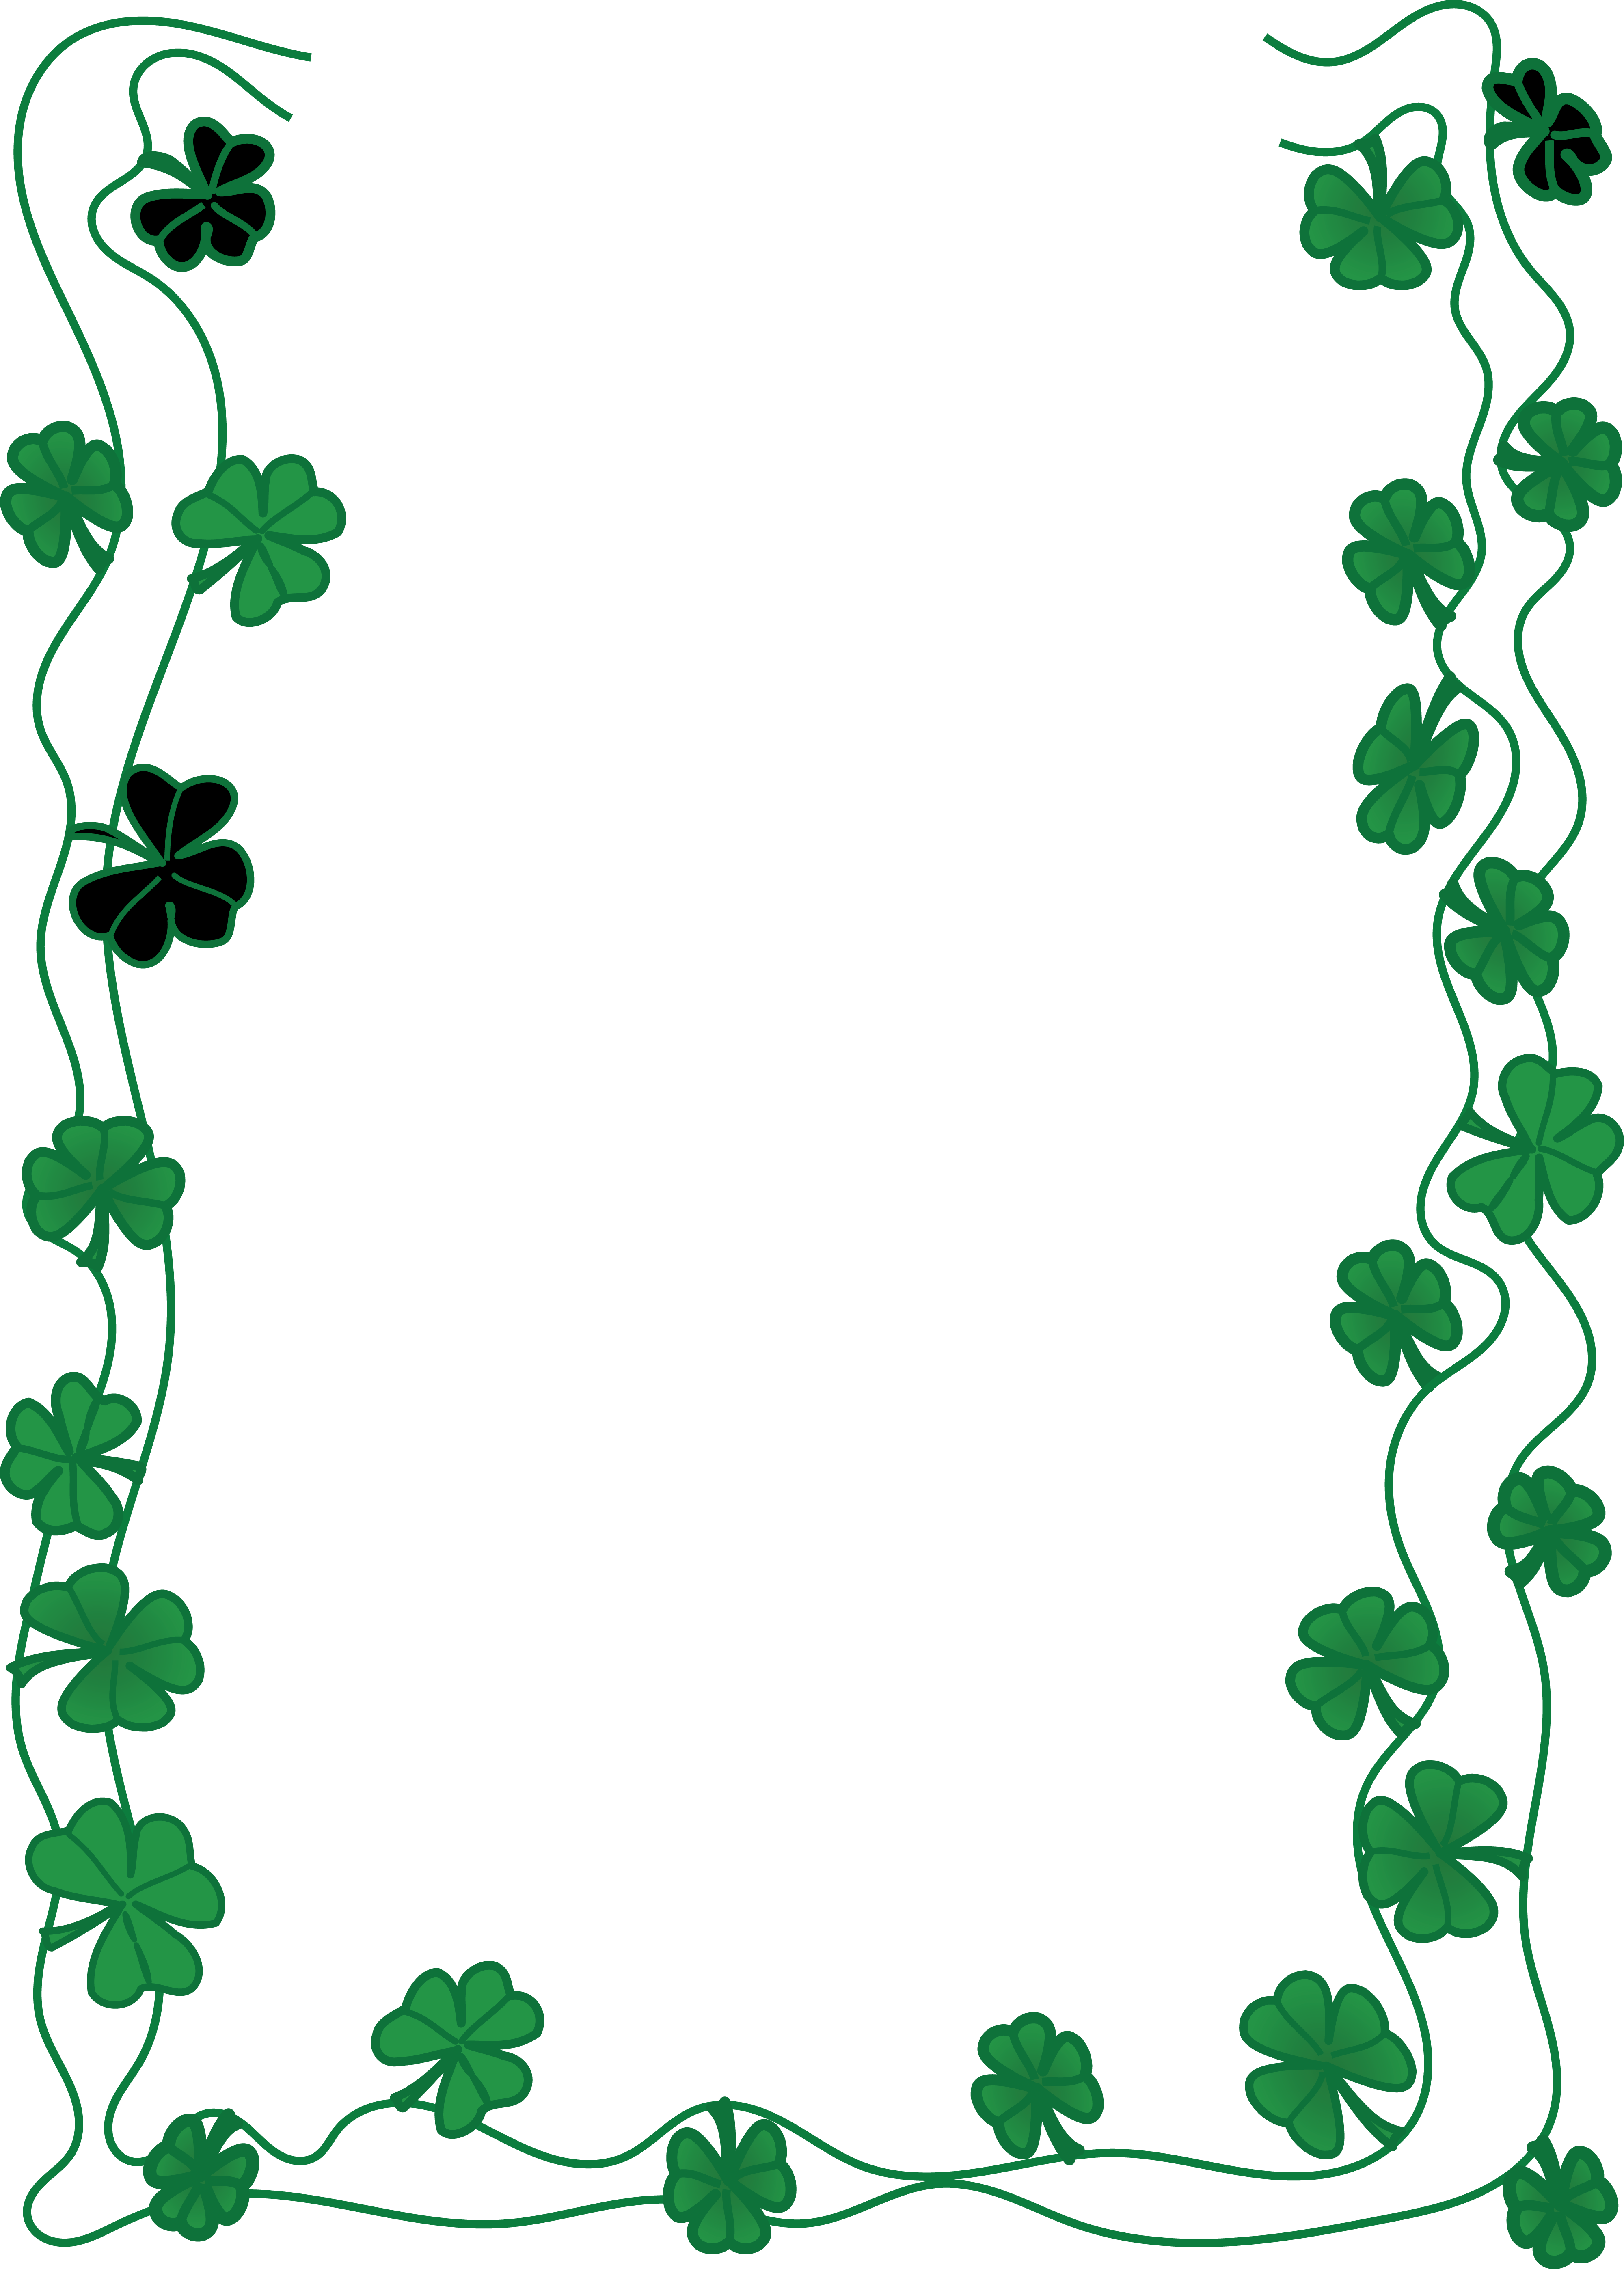 Free Clipart Of A St Patricks Day Shamrock Clover Border - St Patrick's Day Png (4000x5589)